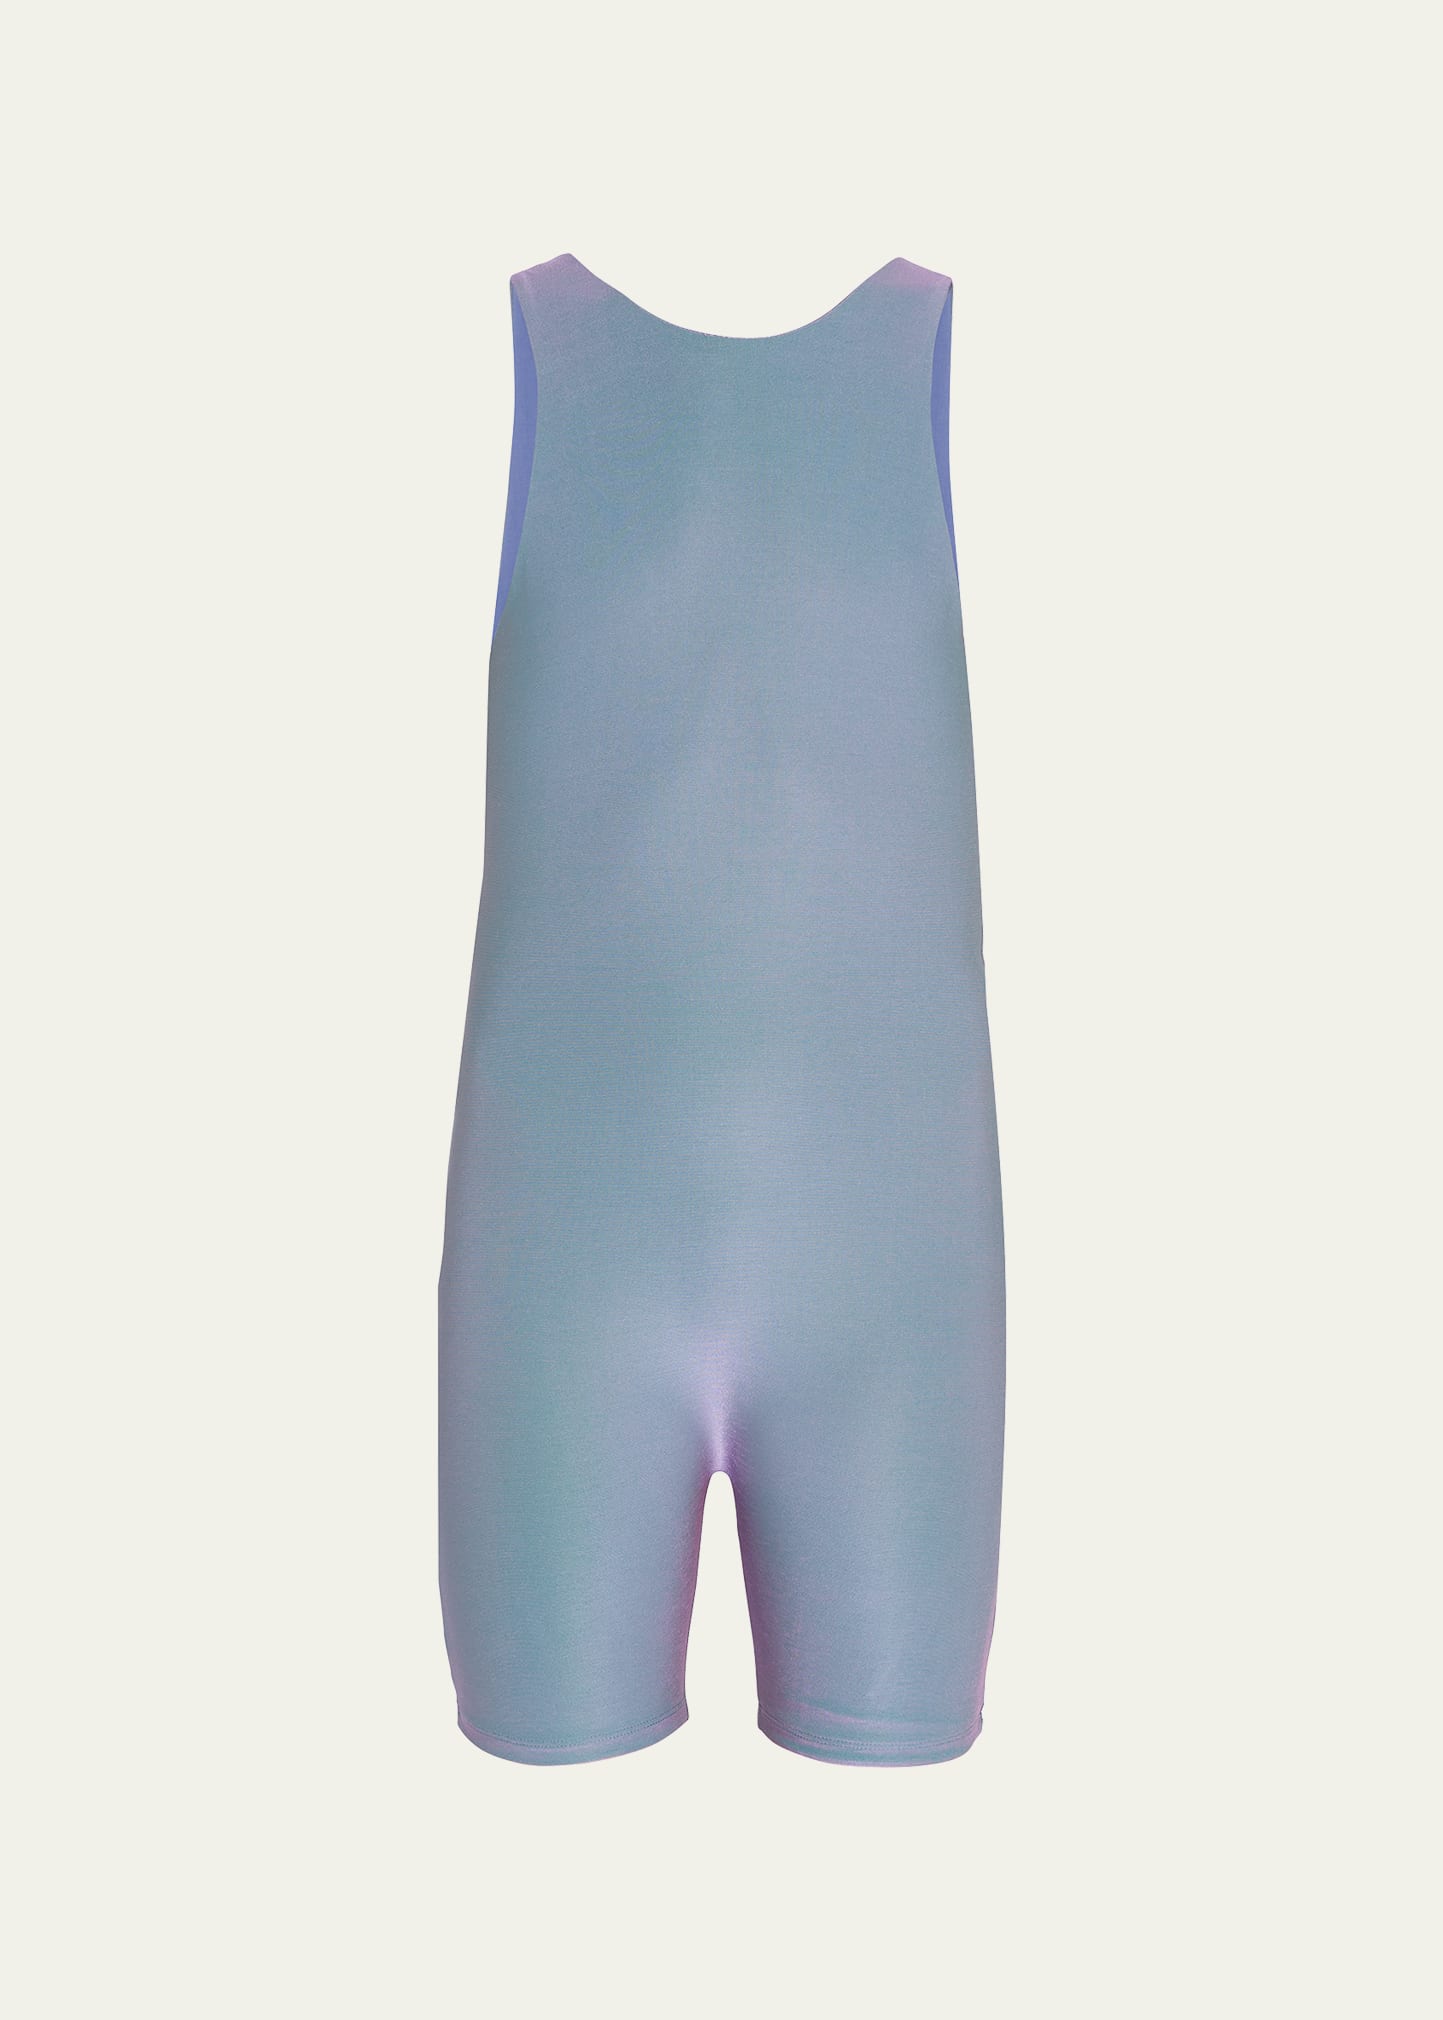 Colorsphere Color-Shifting Onesie